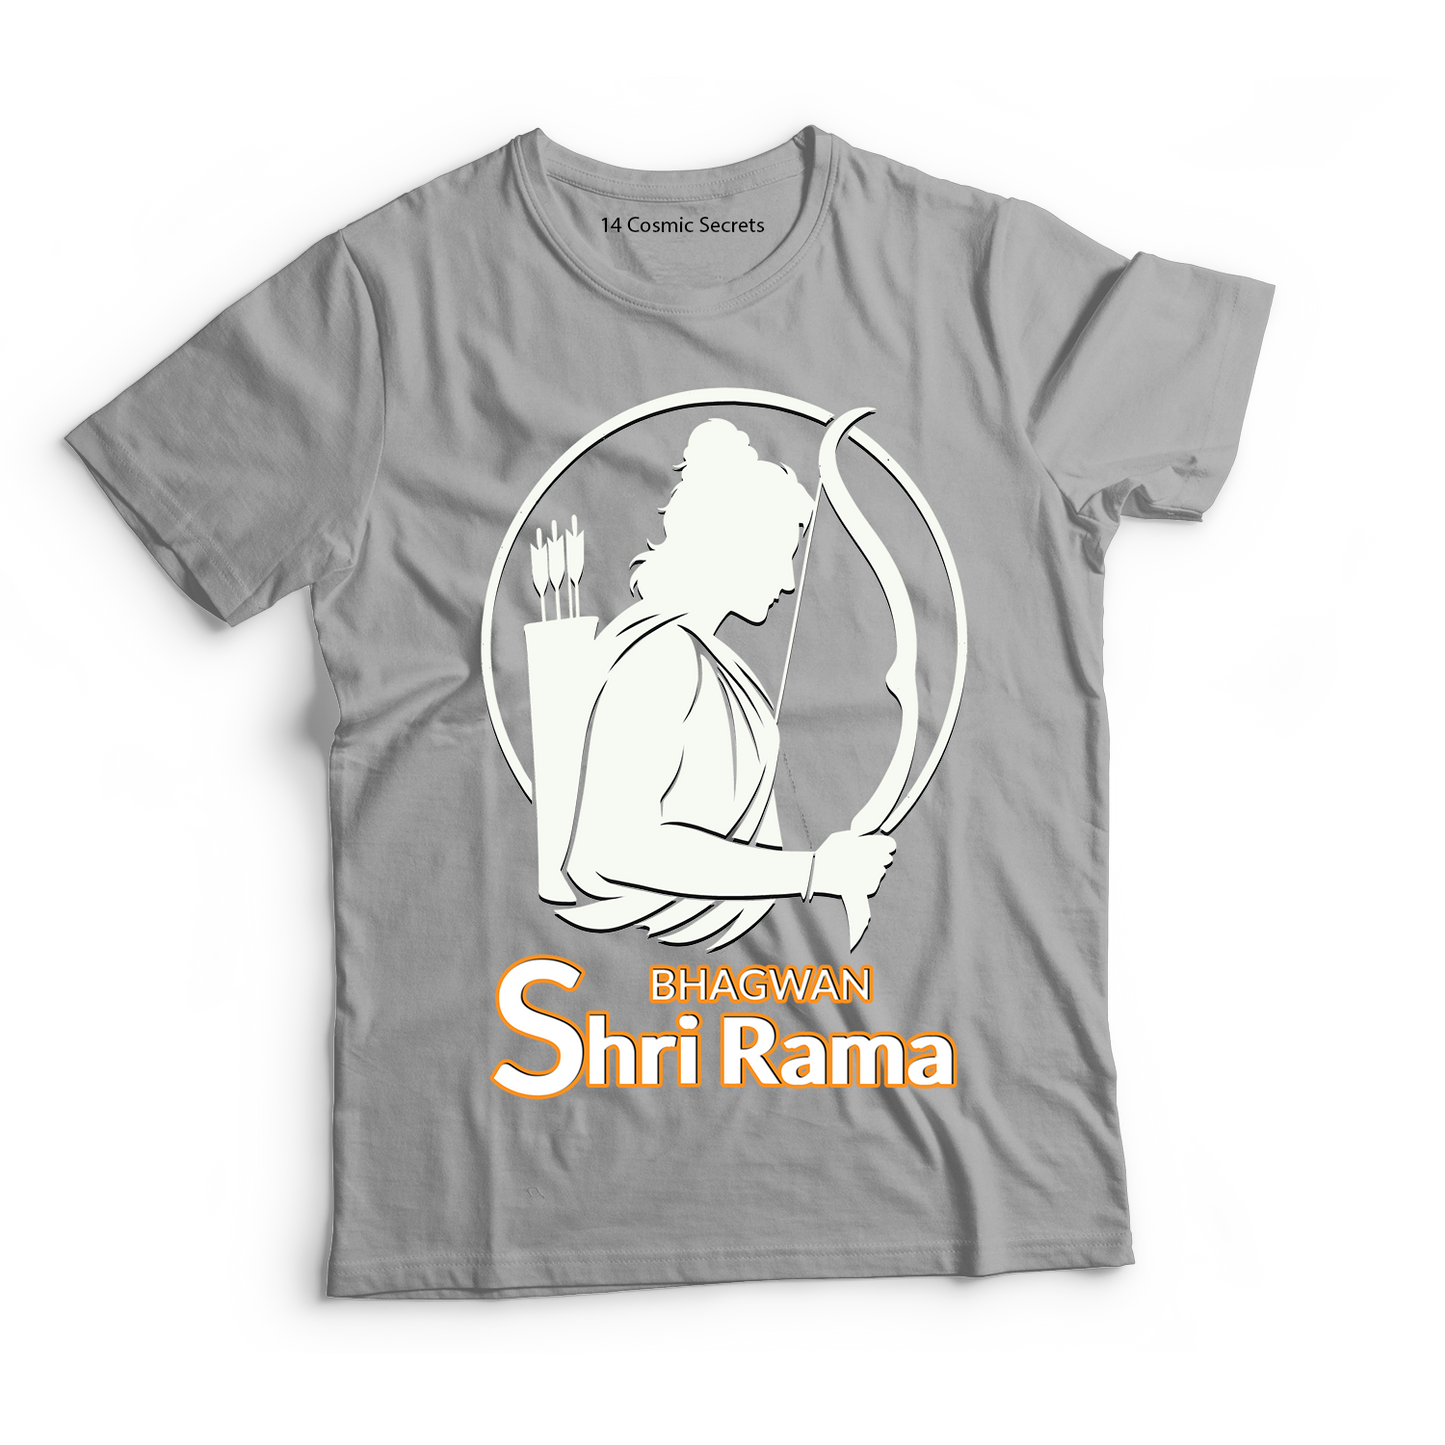 Rama's Blessings on Fabric Graphic Printed T-Shirt for Men Cotton T-Shirt Original Super Heroes of India T-Shirt